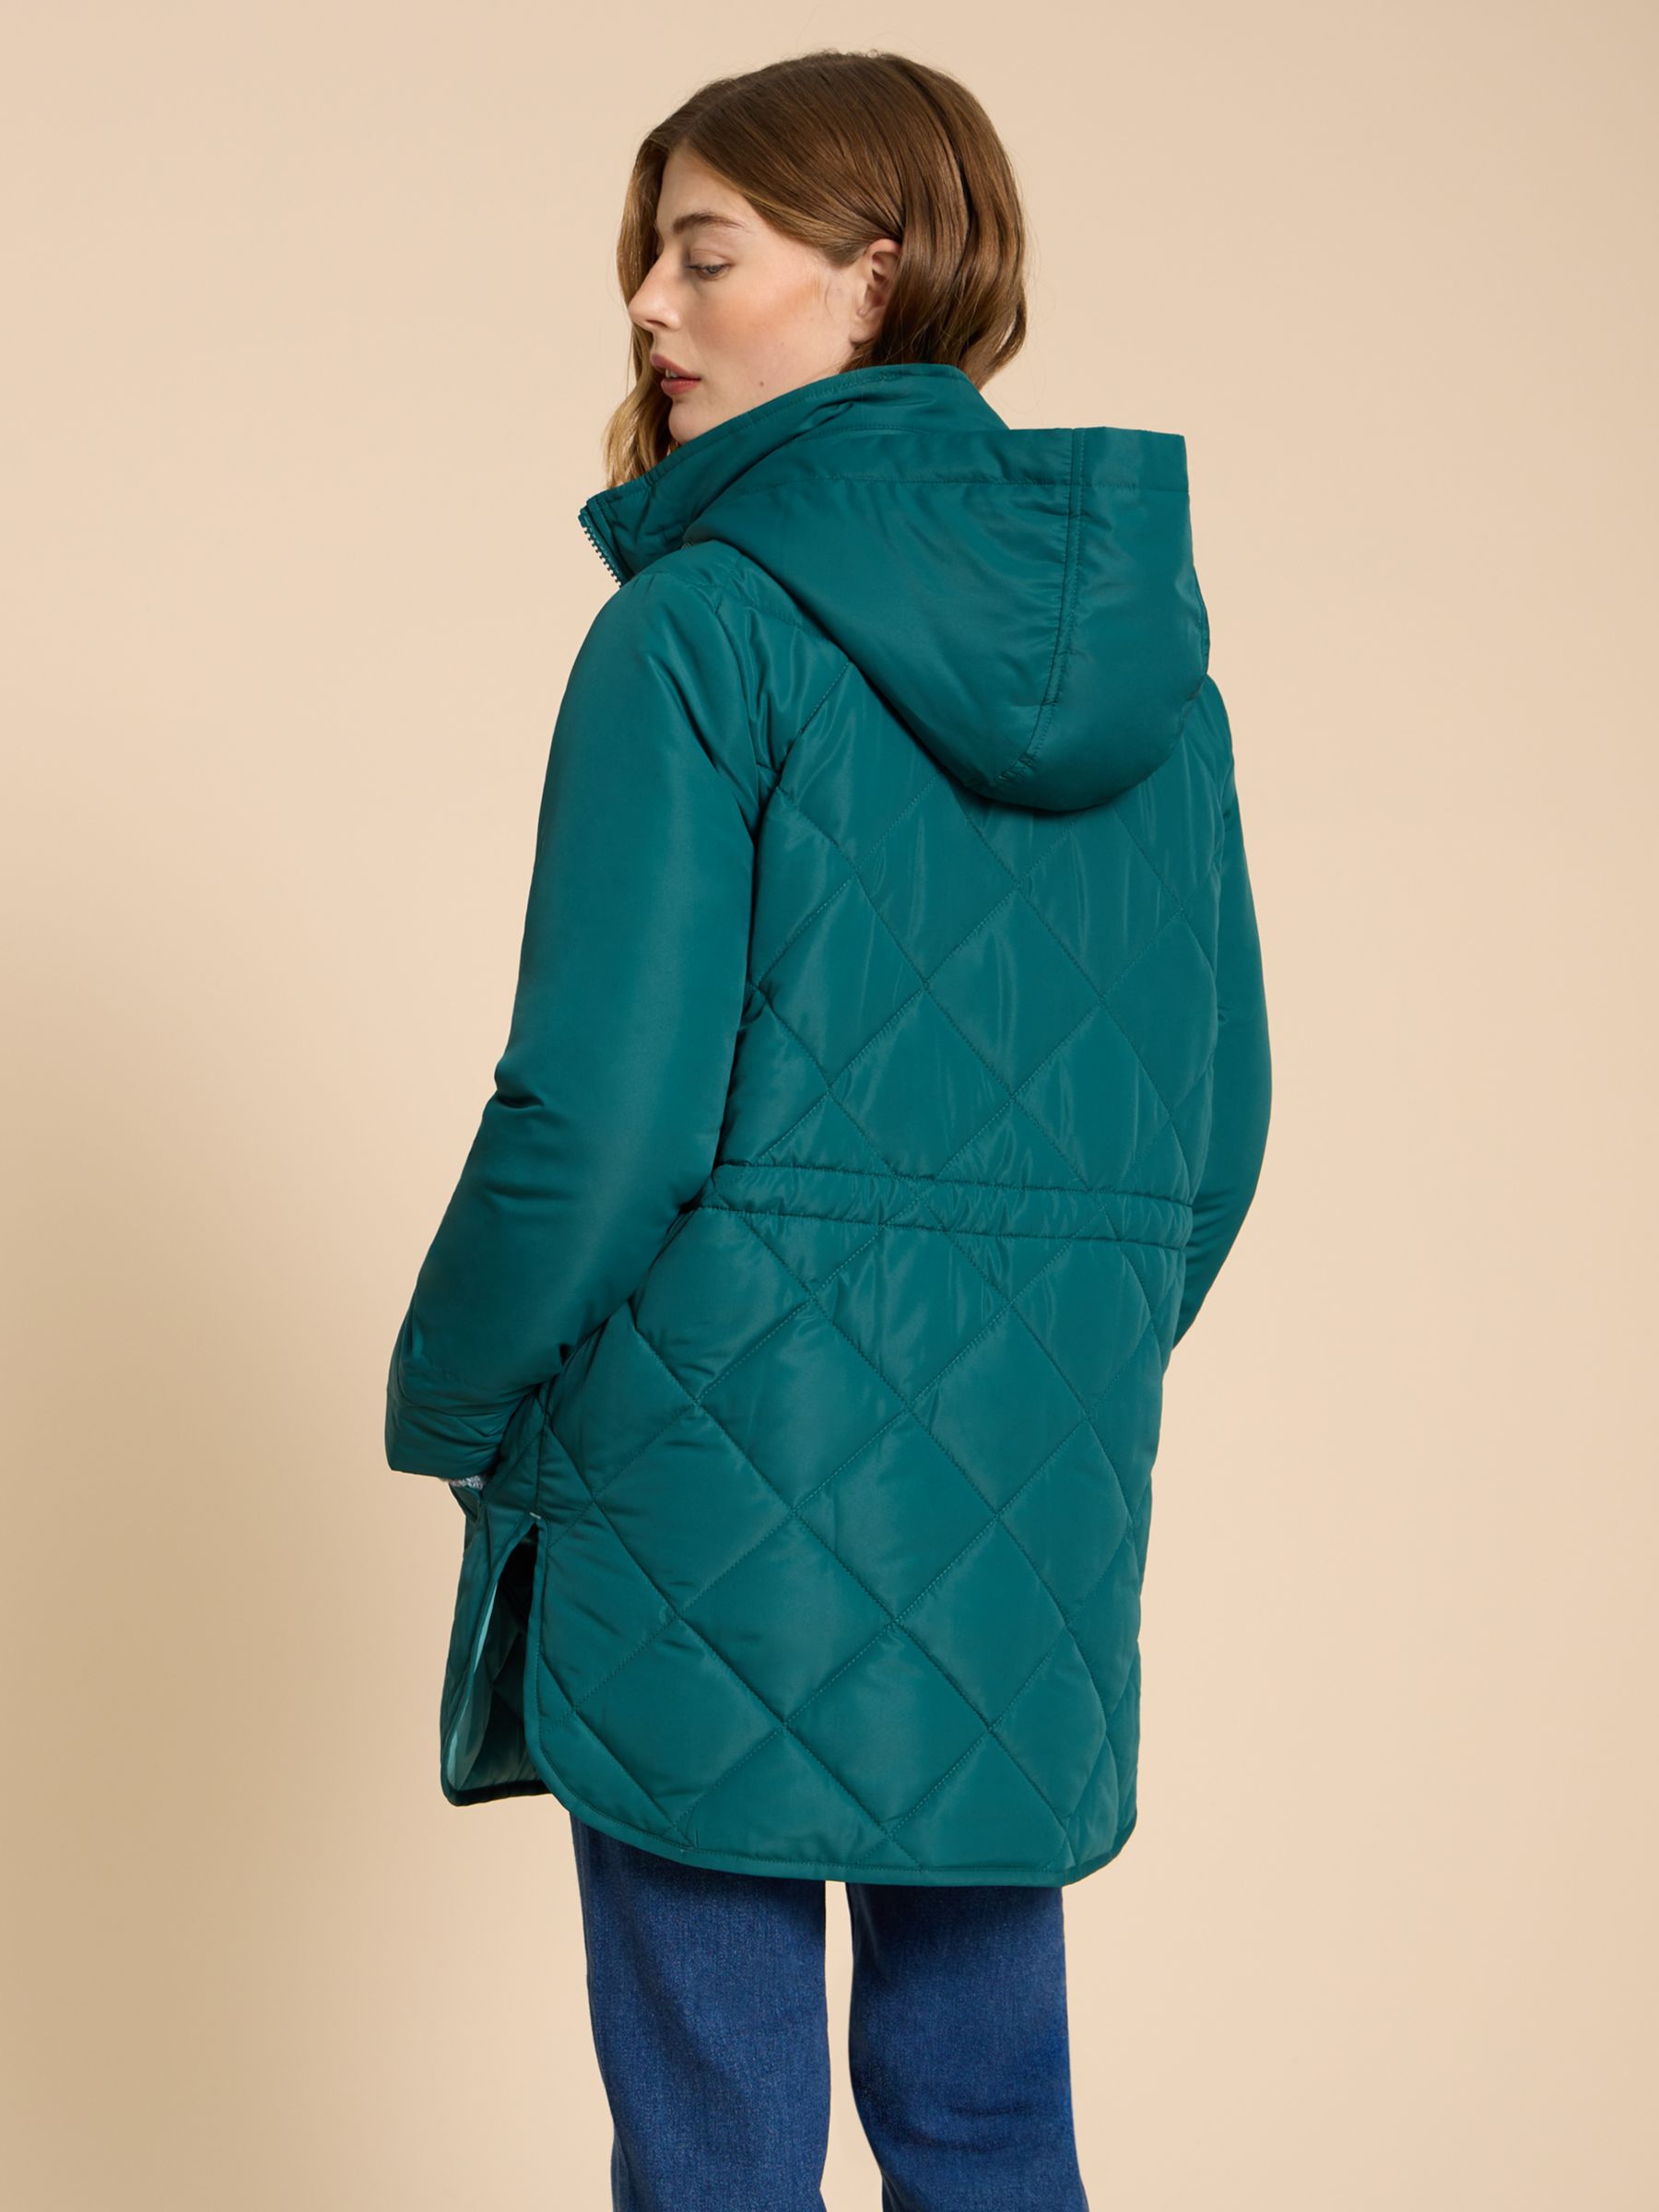 White Stuff Emilia Quilted Coat, Teal at John Lewis & Partners